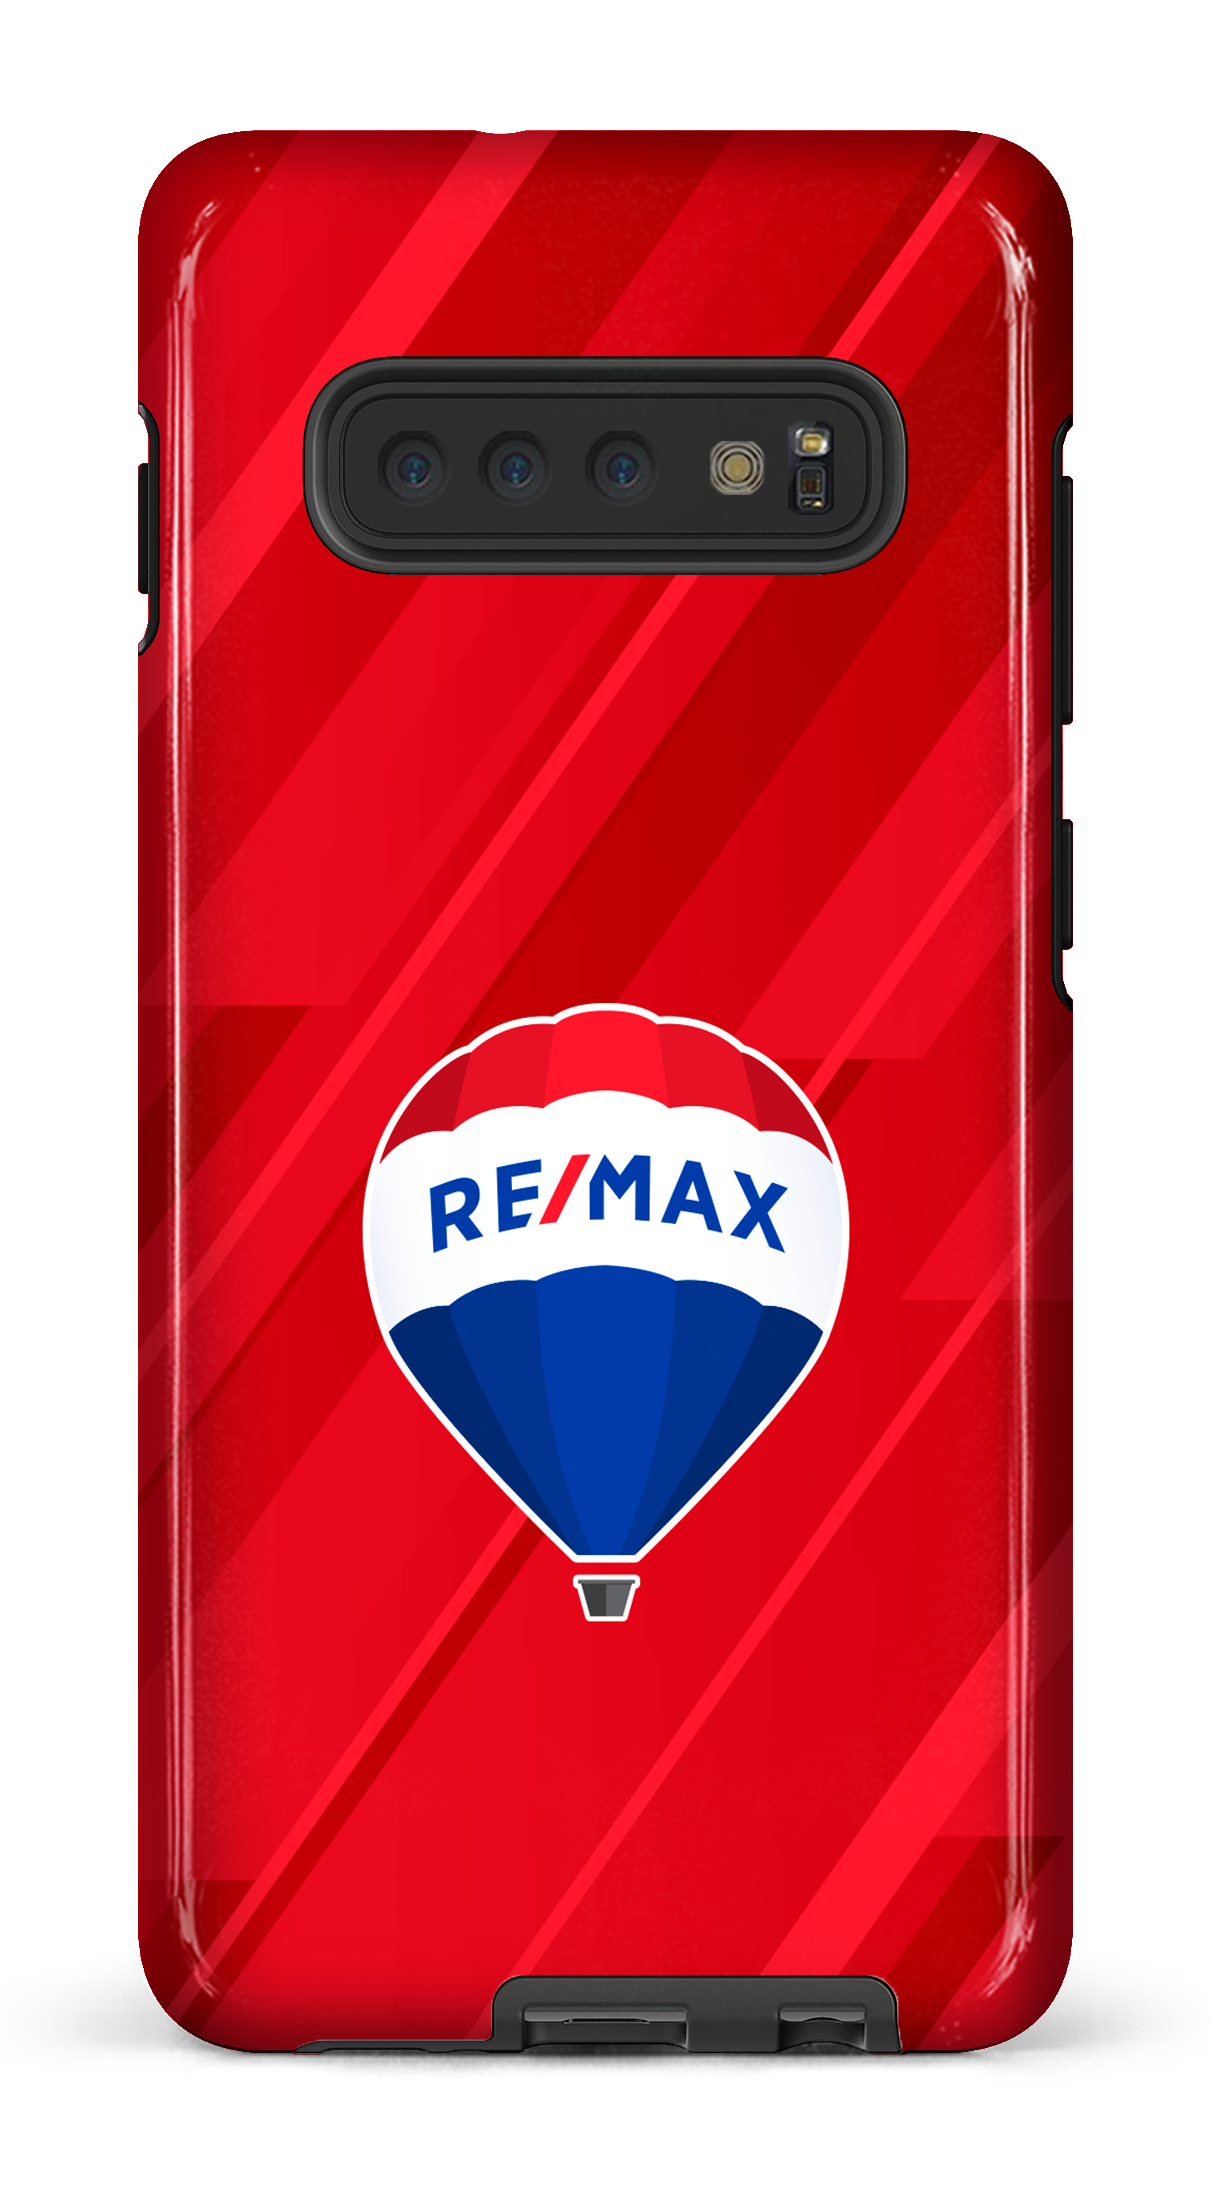 Remax Rouge - Galaxy S10 Plus